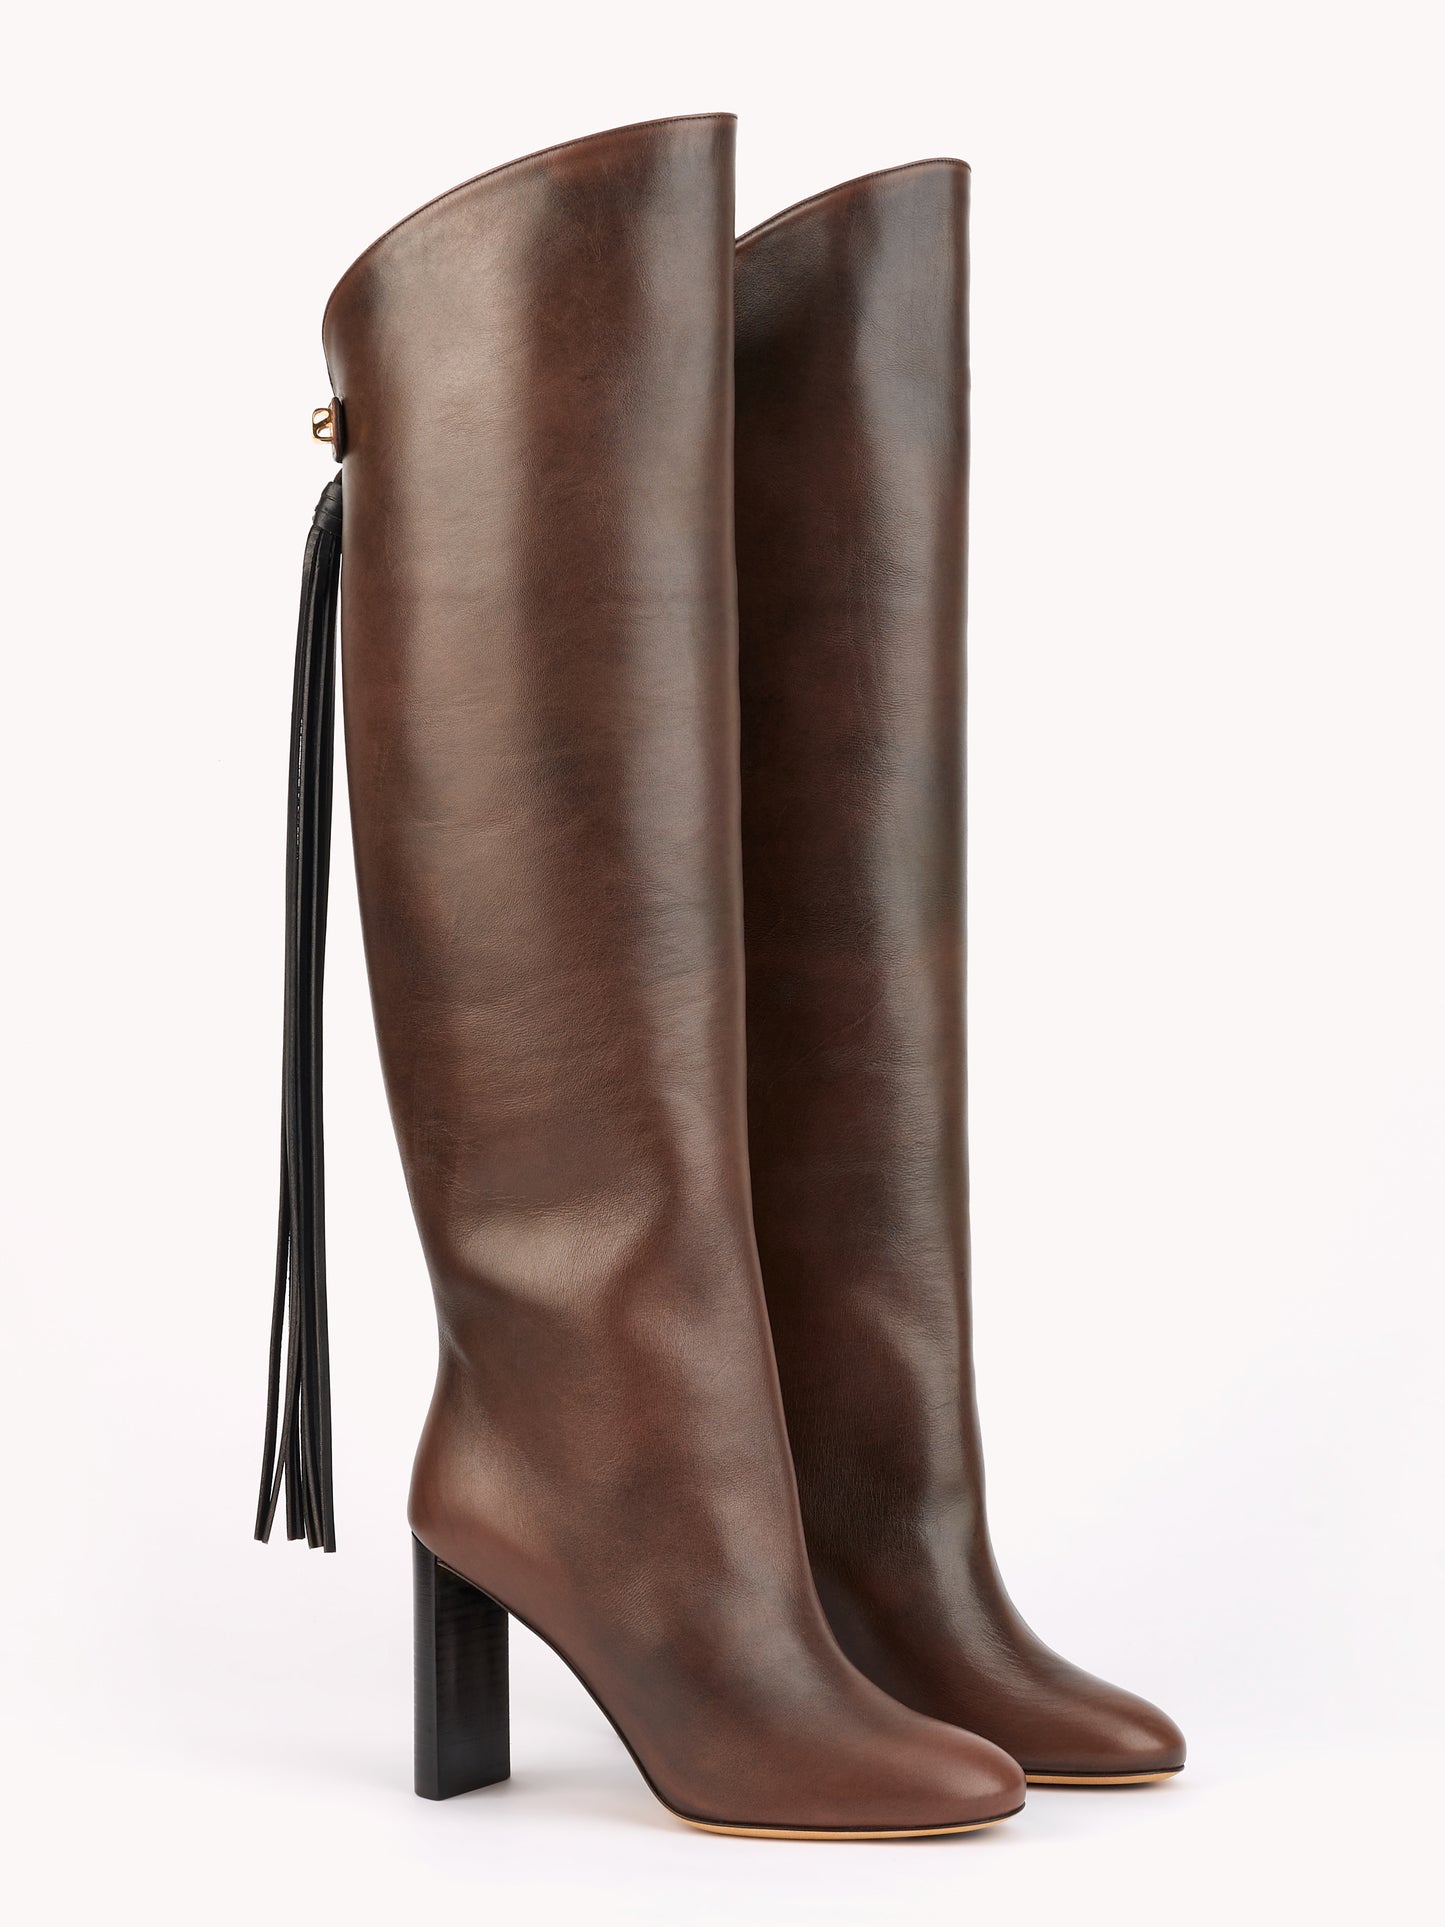 sophisticated luxury equestrian high boots in brown chocolate leather with removable strap skorpios